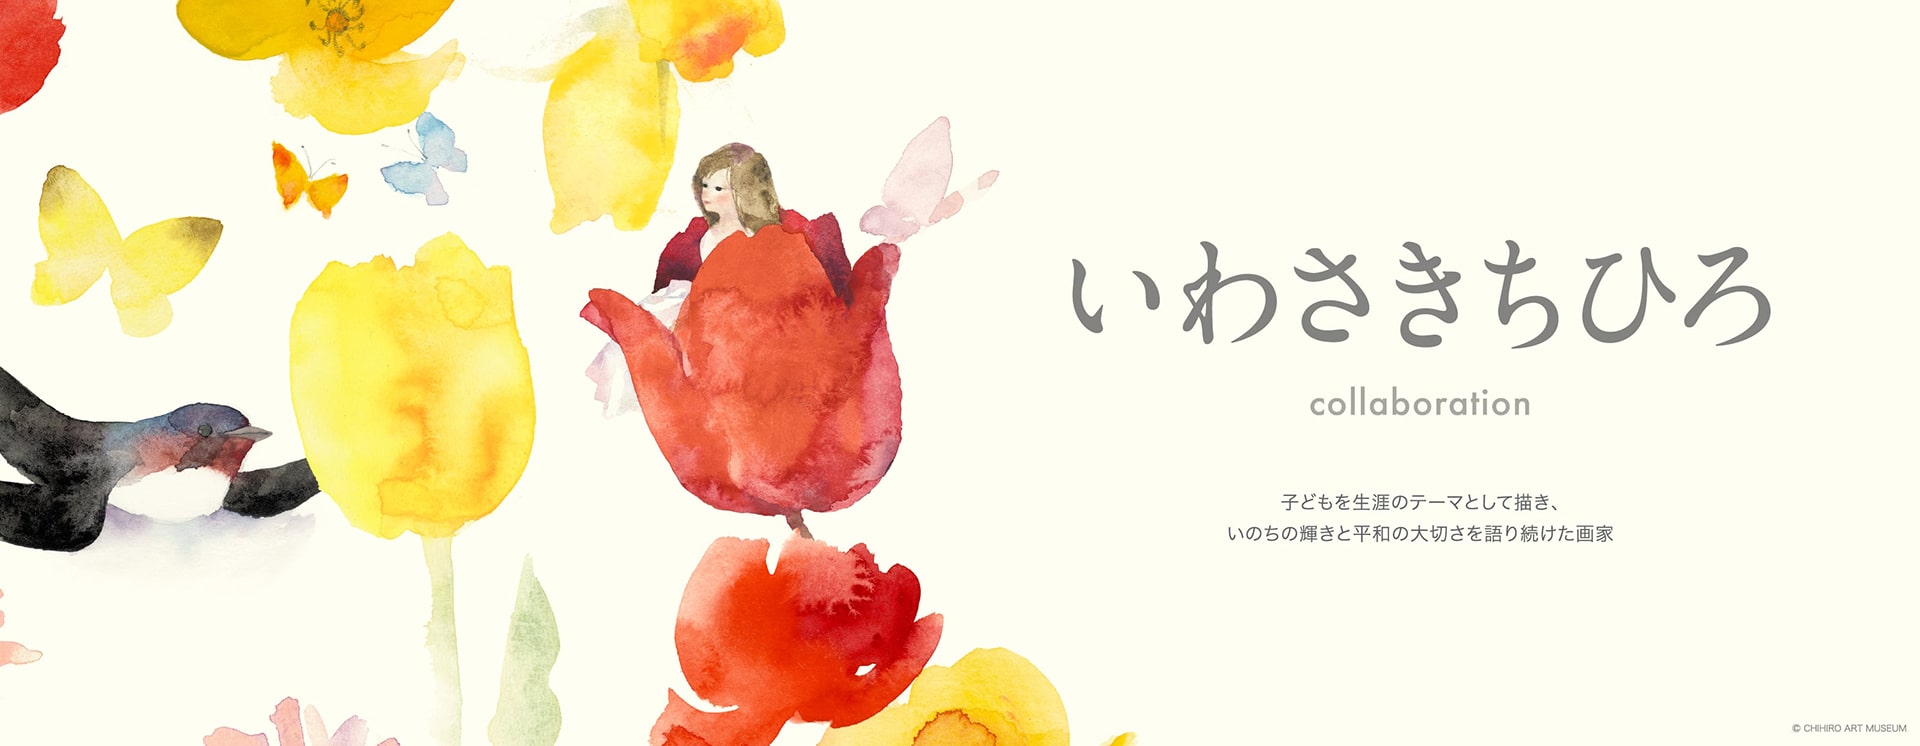 Chihiro Iwasaki, a painter who continued to draw children as a lifelong theme. She left behind the phrase, "Peace and happiness for all children around the world," and continues to talk about the brilliance of life and the importance of peace through the children and flowers she draws. [ssorder:-20220405]